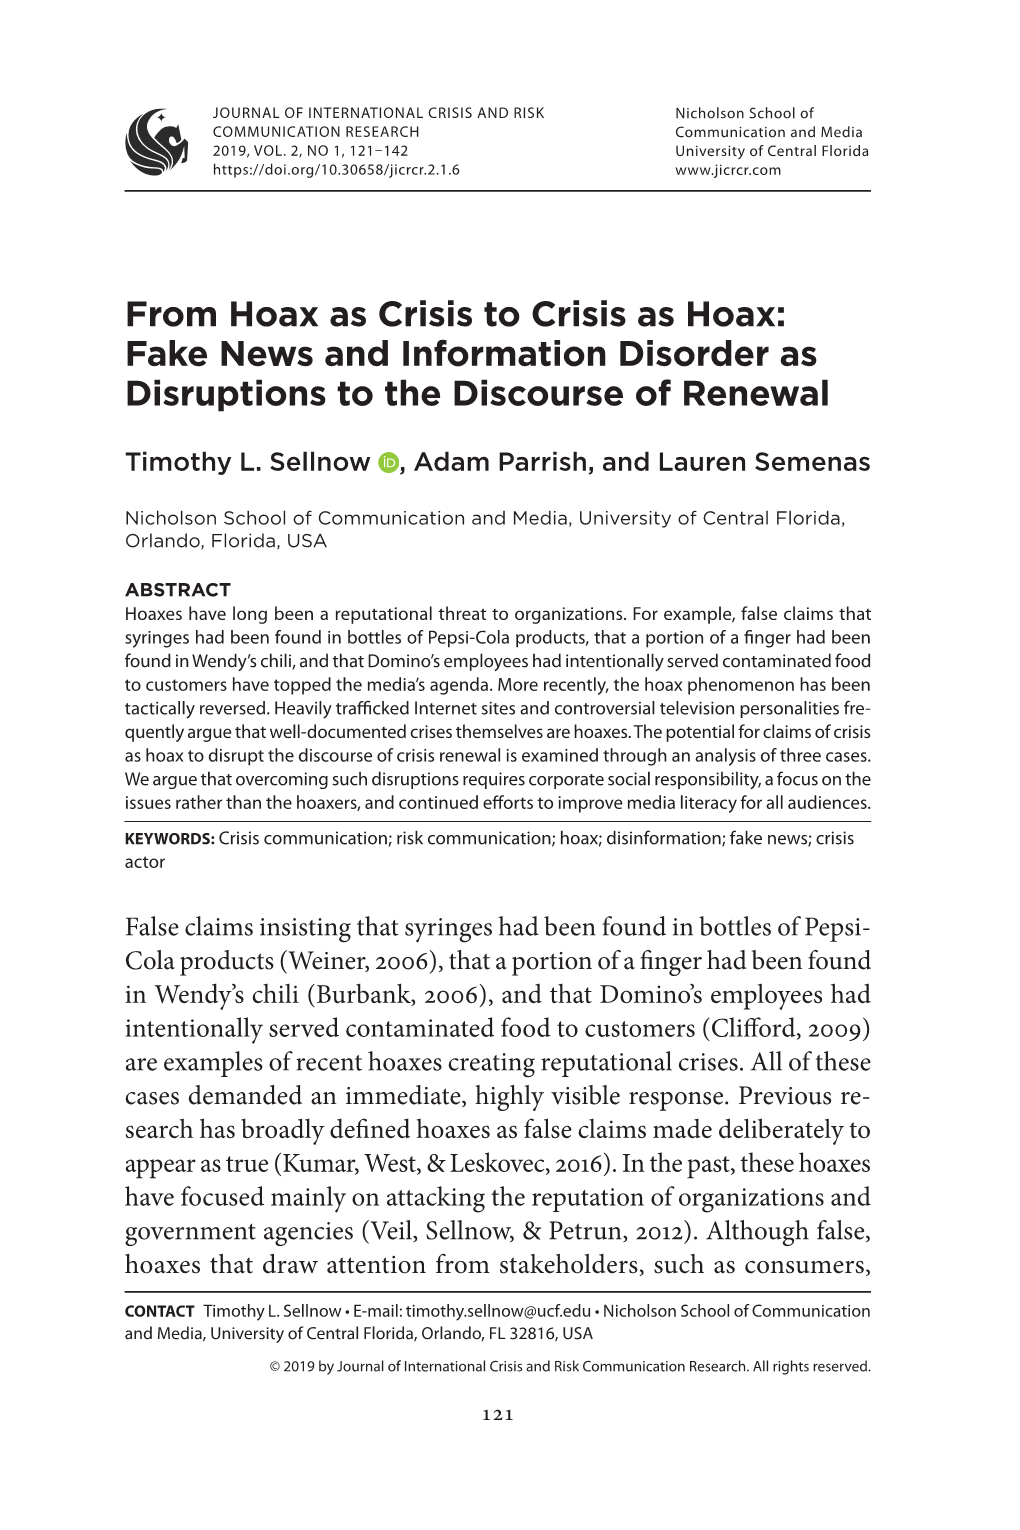 From Hoax As Crisis to Crisis As Hoax: Fake News and Information Disorder As Disruptions to the Discourse of Renewal